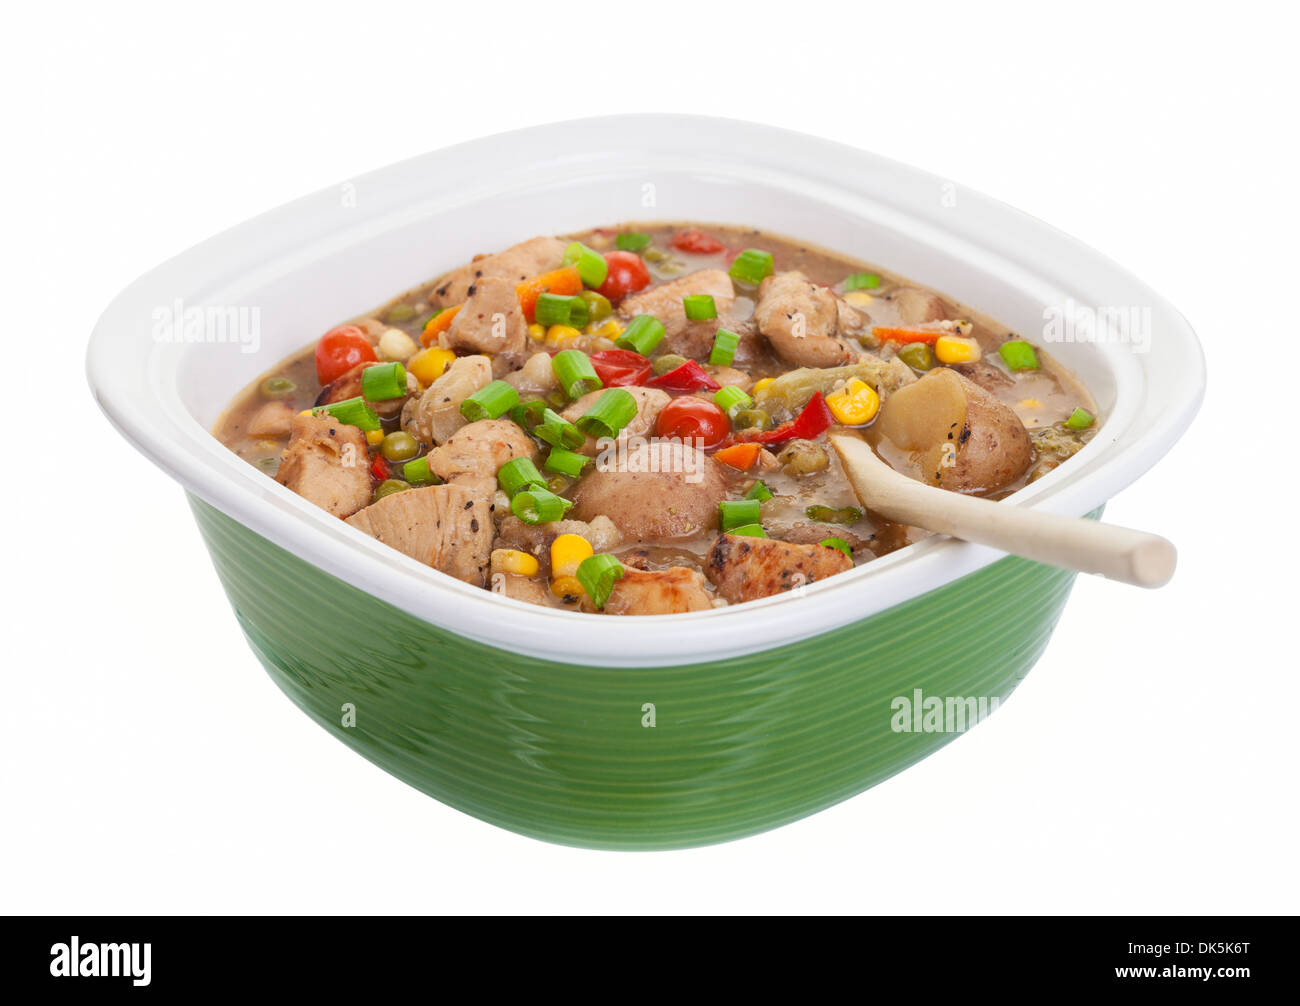 wholesome stew casserole on a white background with a clipping path included. Stock Photo